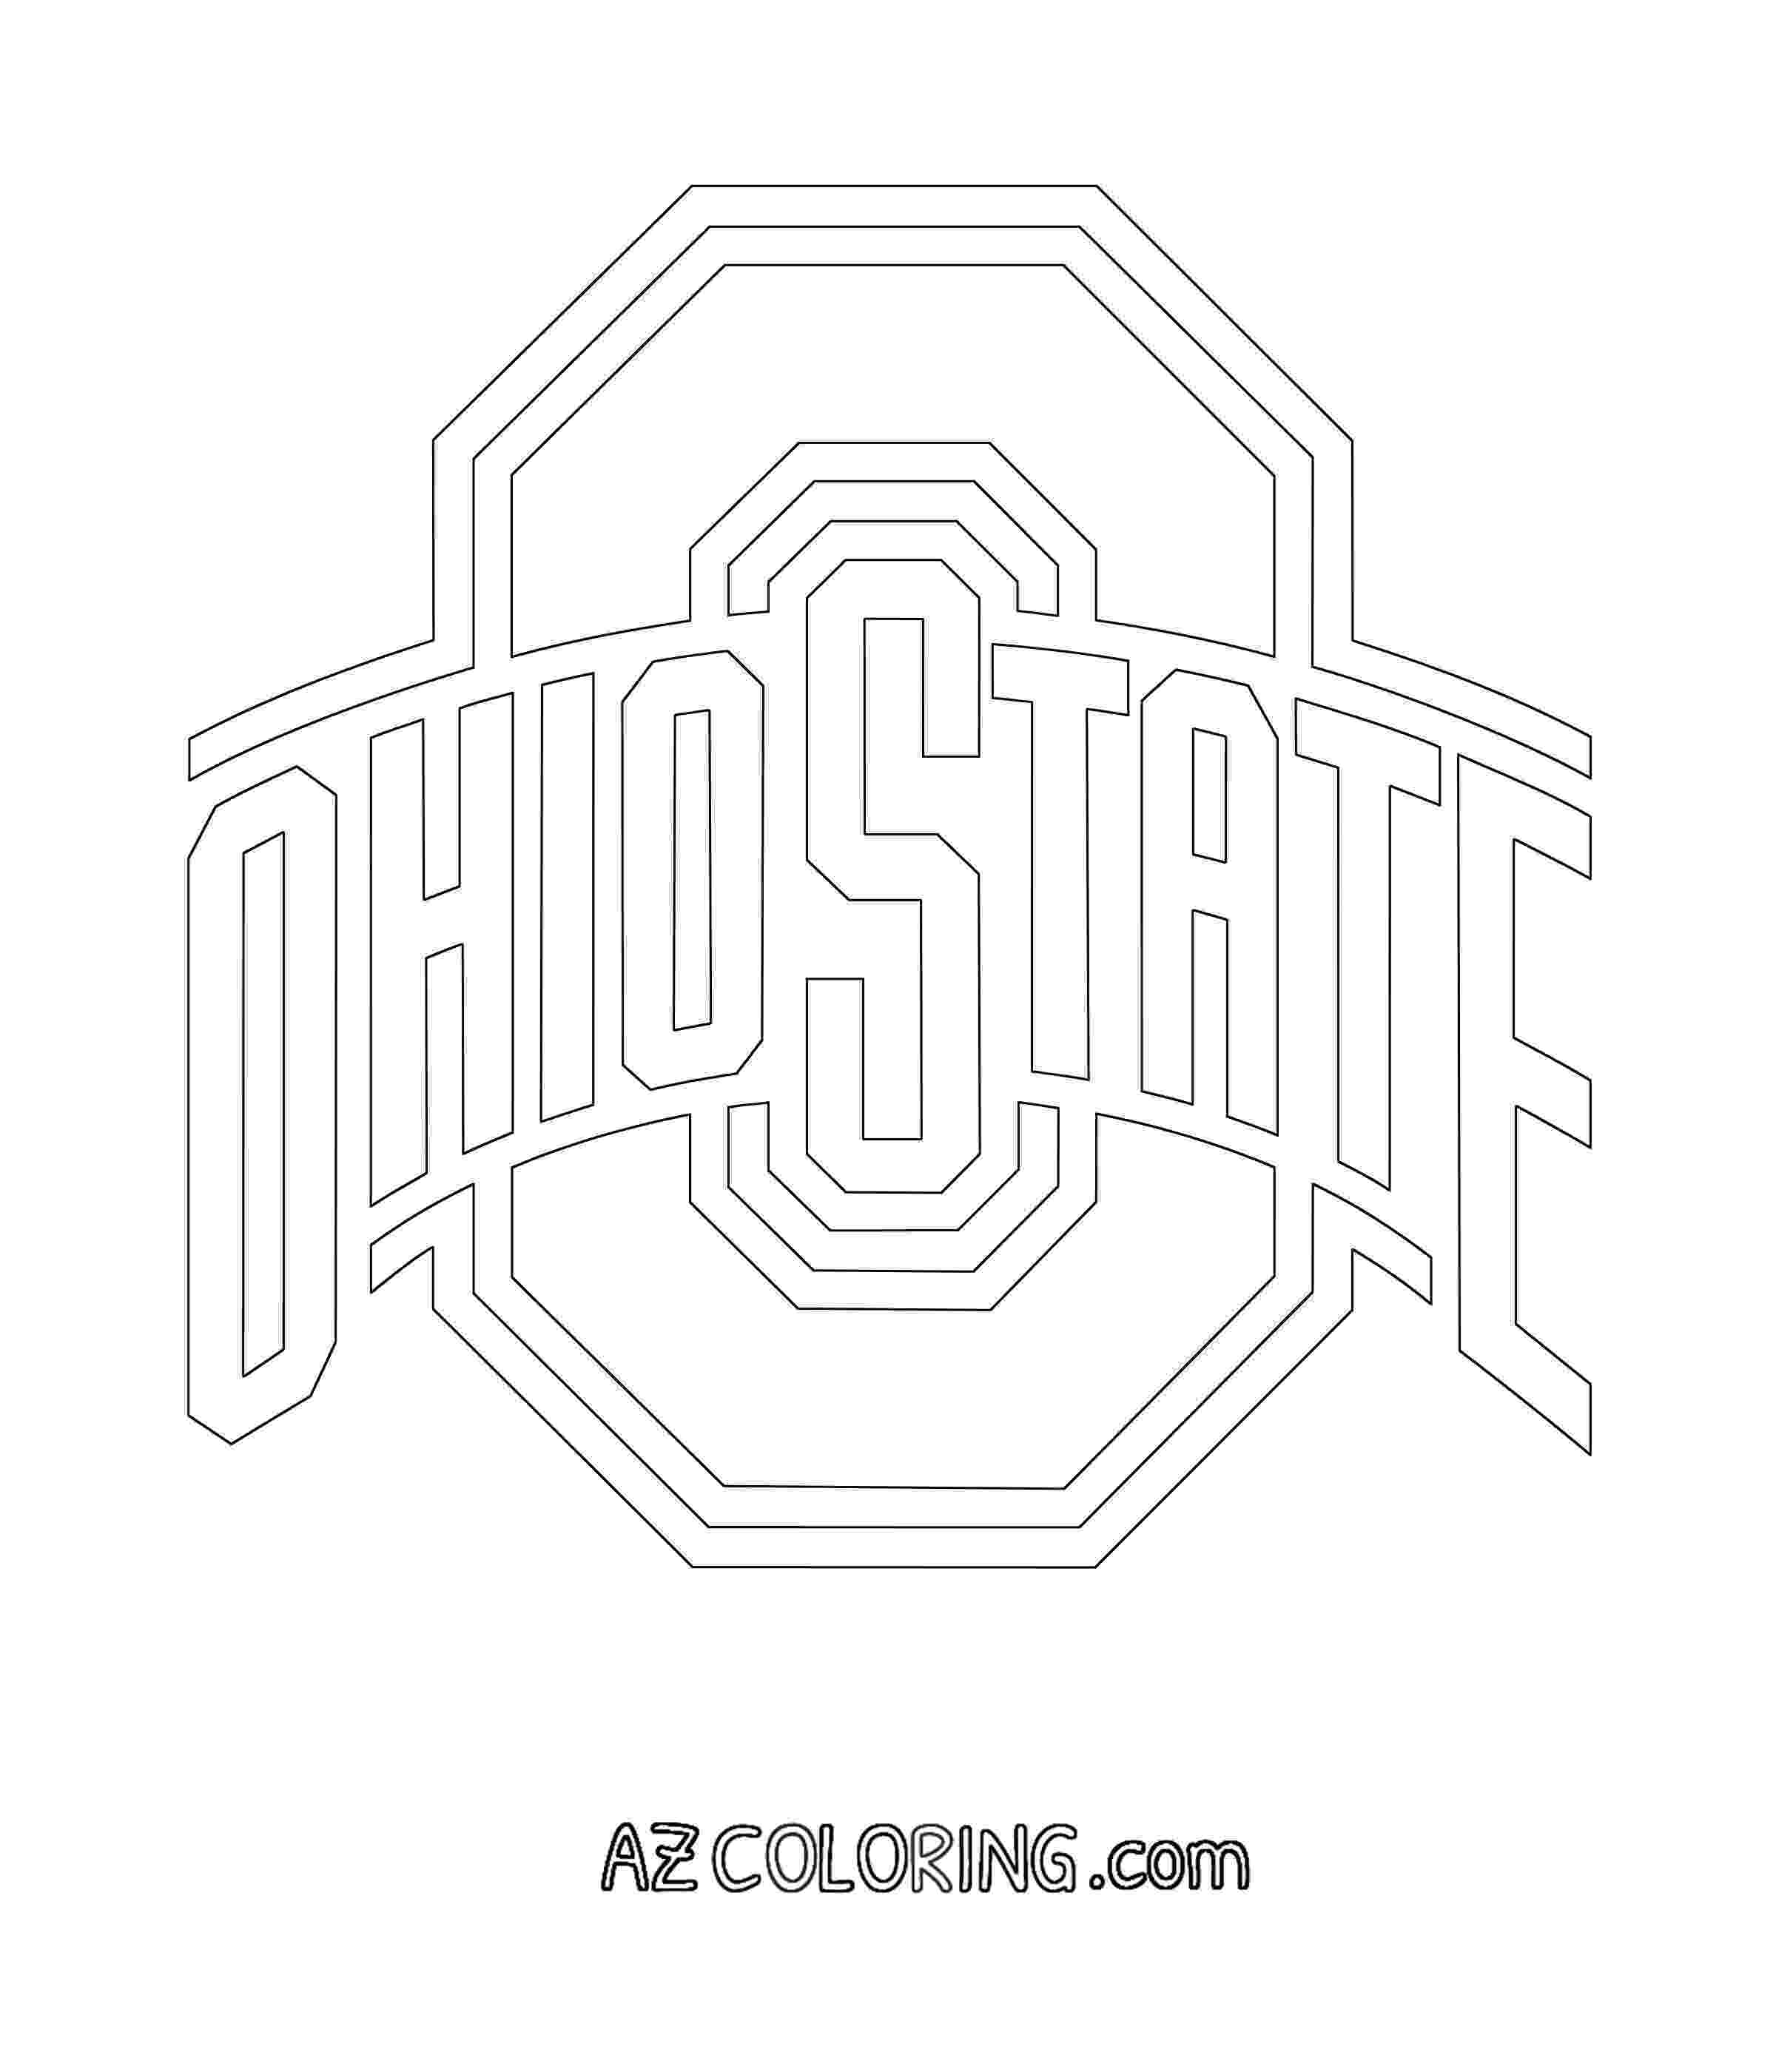 ohio state coloring pages ohio state buckeyes coloring page coloring home pages state ohio coloring 